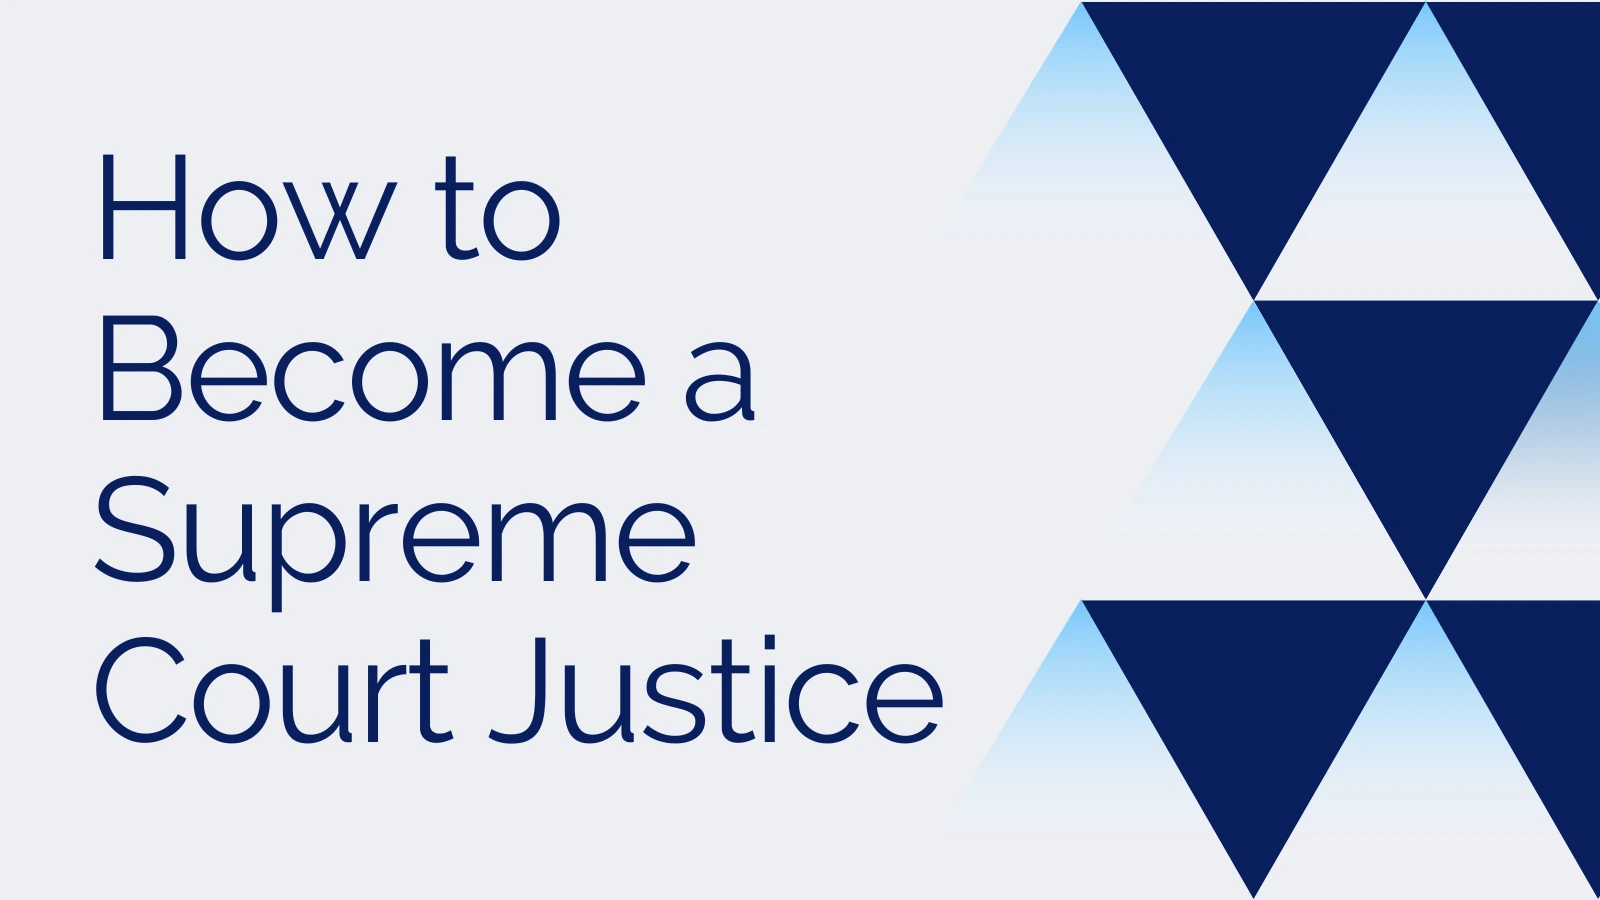 How to Become a Supreme Court Justice